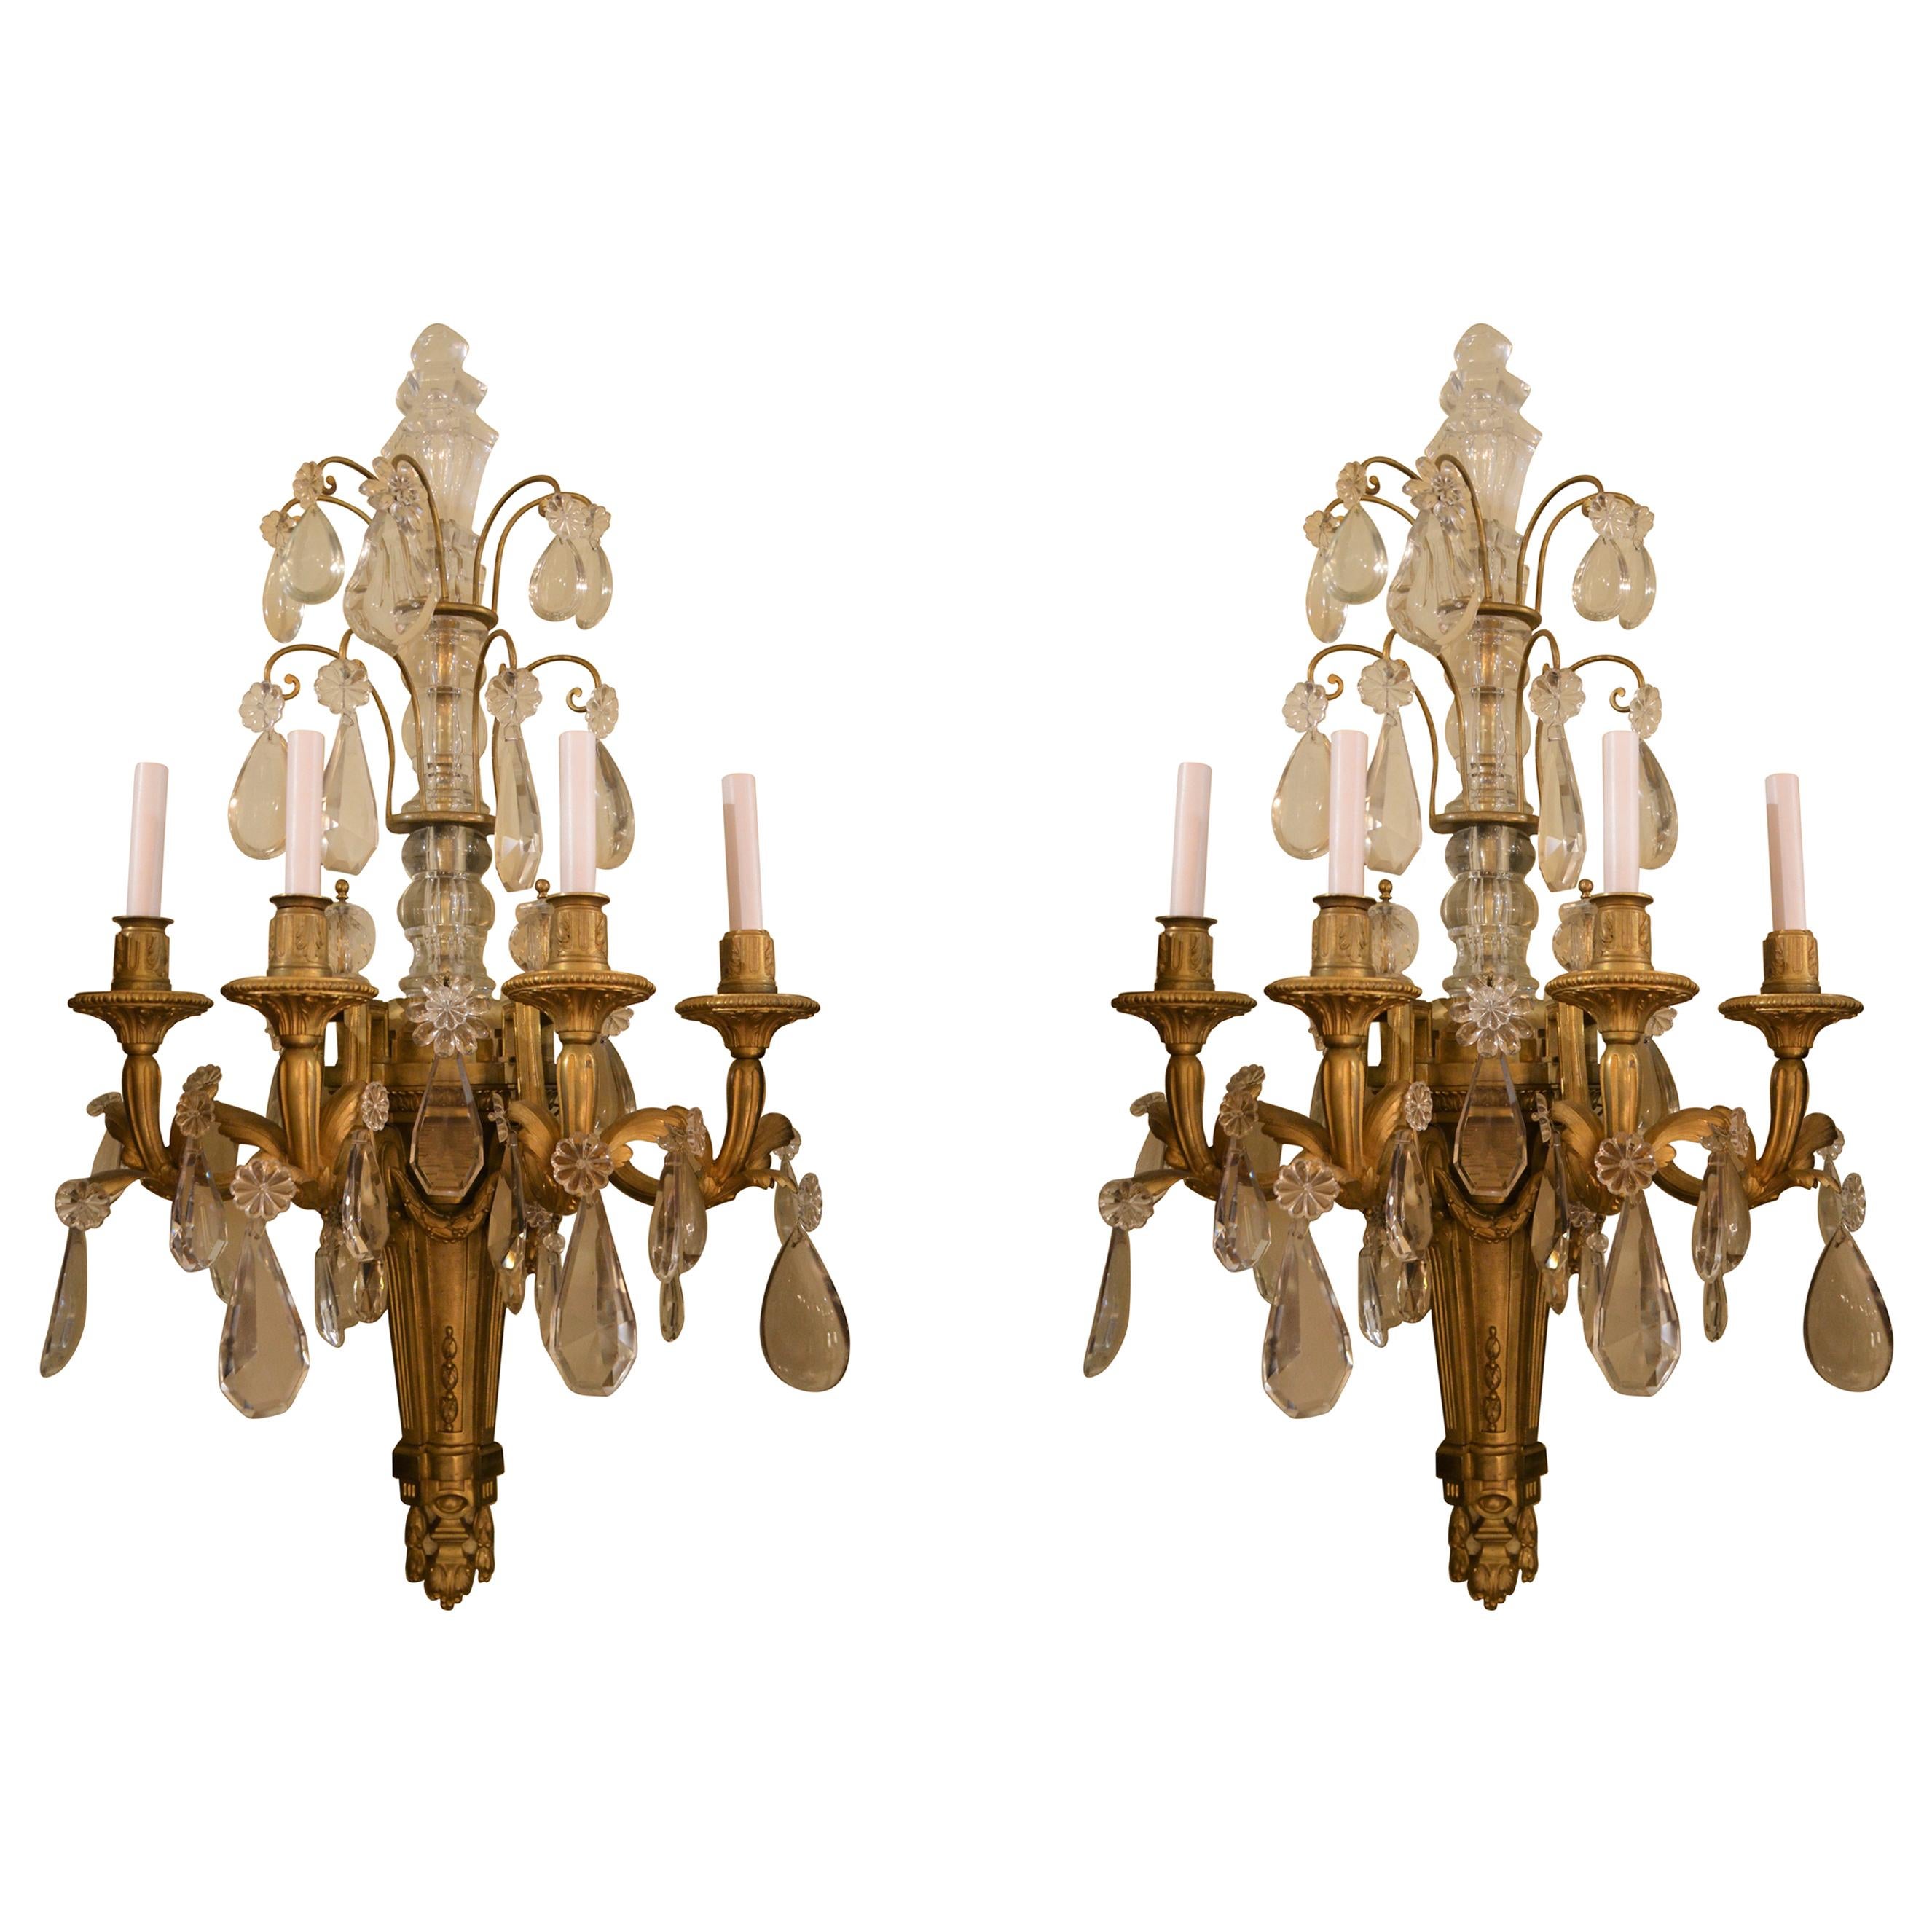 Pair of Antique Louis XVI Baccarat Crystal and Ormolu Sconces